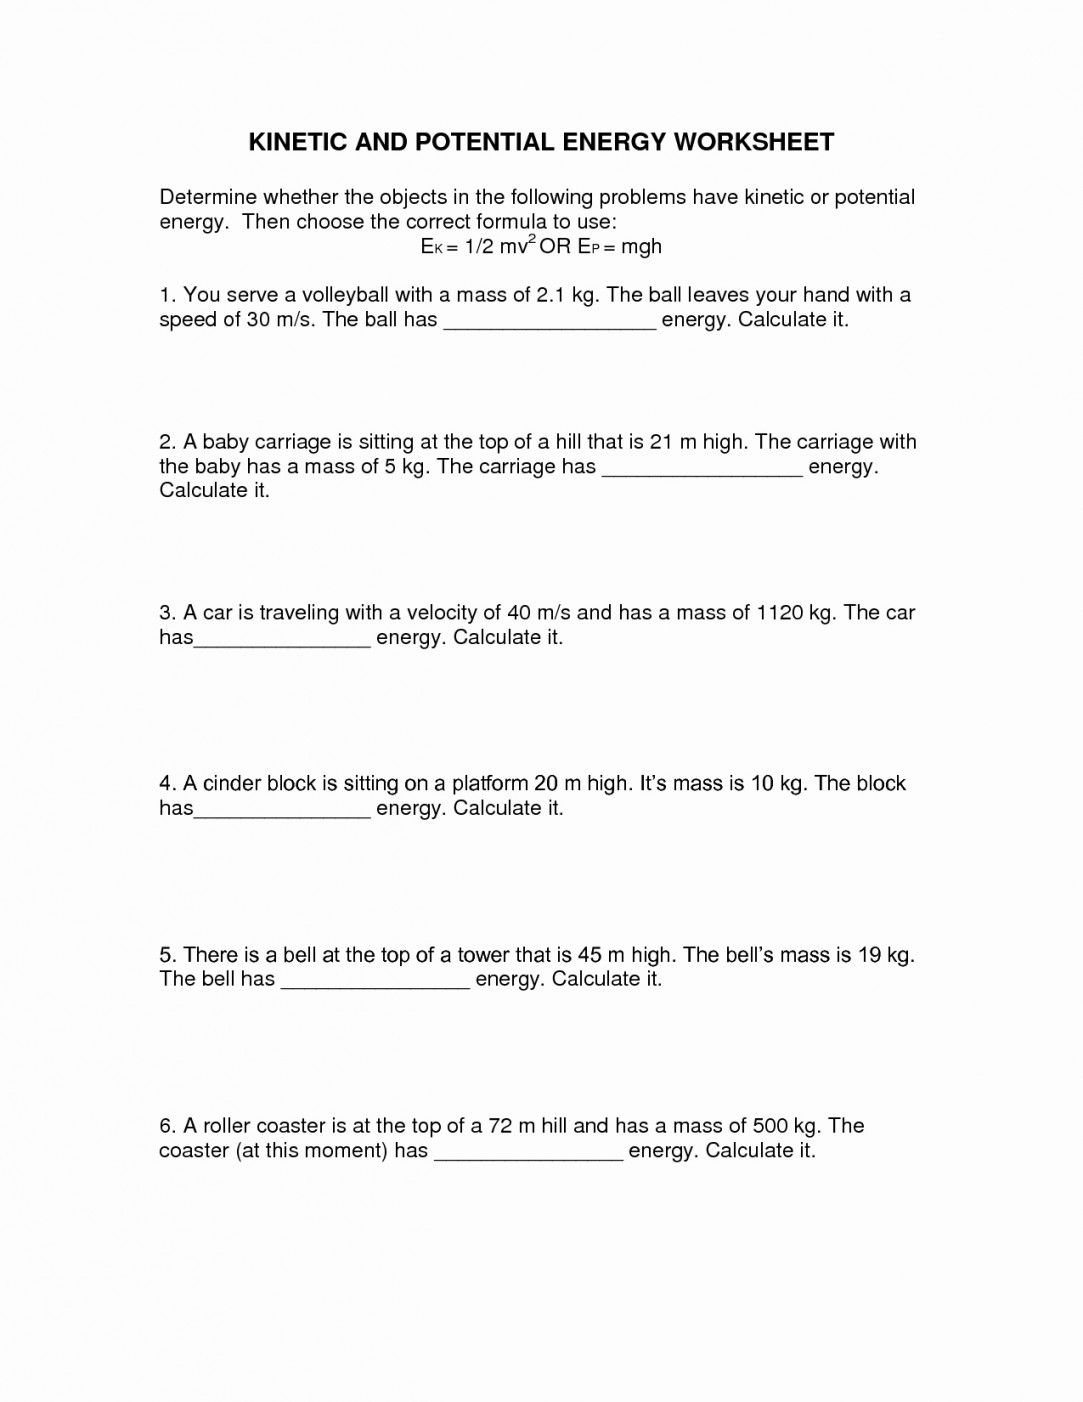 Kinetic And Potential Energy Worksheet Key | Lostranquillos - Free Printable Worksheets On Potential And Kinetic Energy